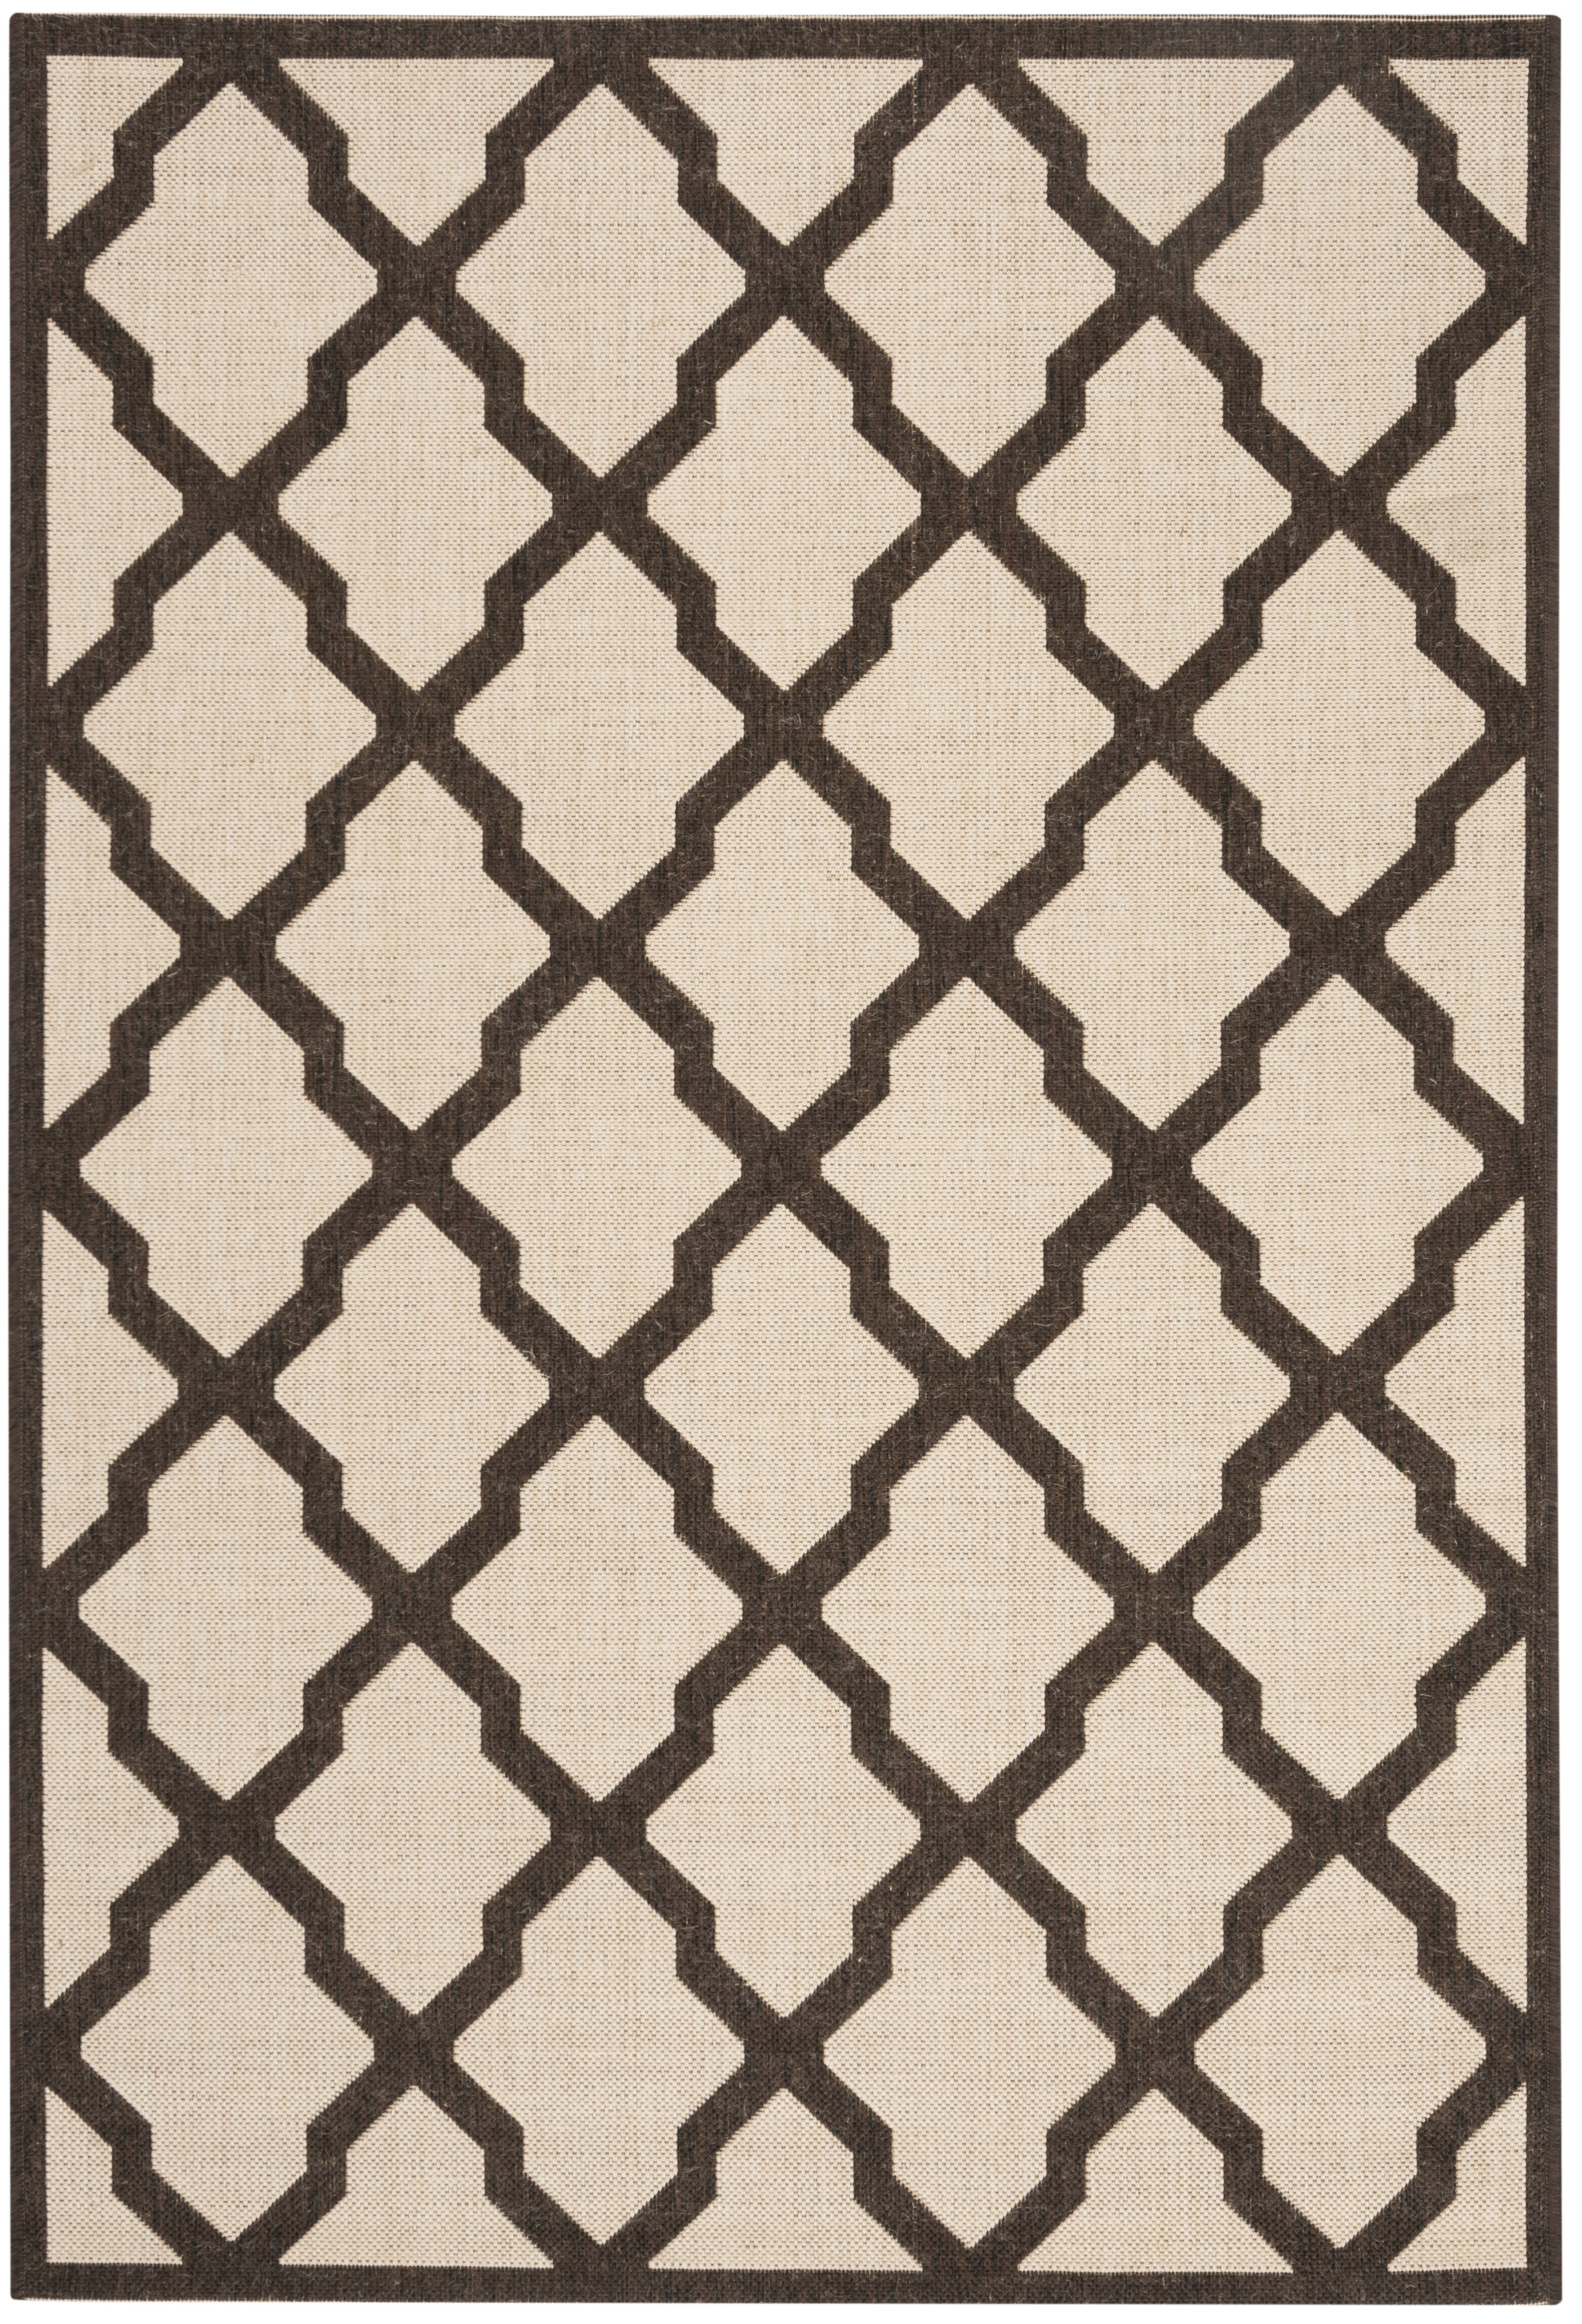 Arlo Home Indoor/Outdoor Woven Area Rug, LND122B, Natural/Brown,  4' X 6' - Image 0